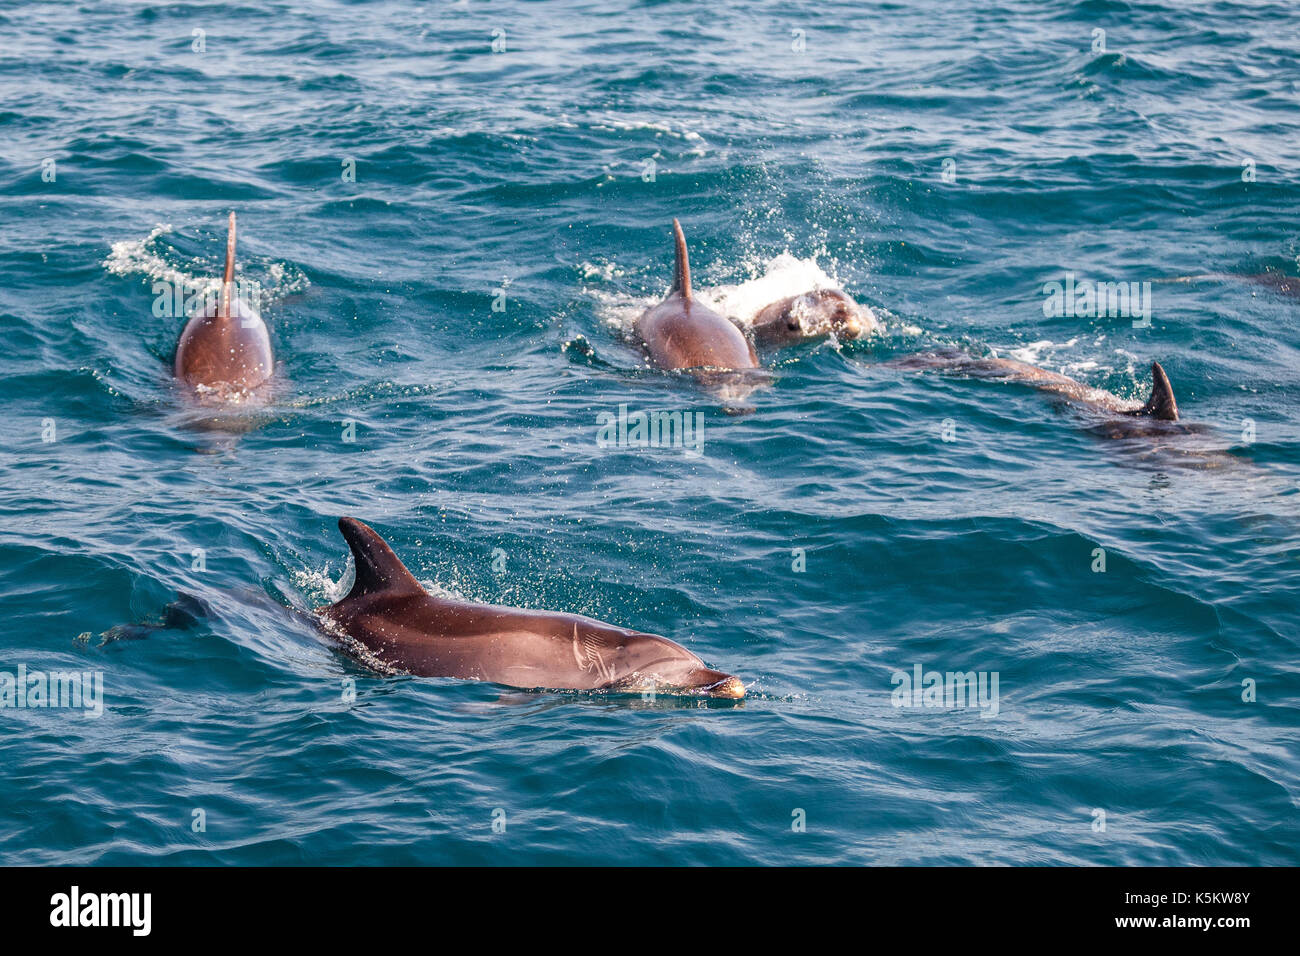 Dolphins and calderons in the sea Stock Photo